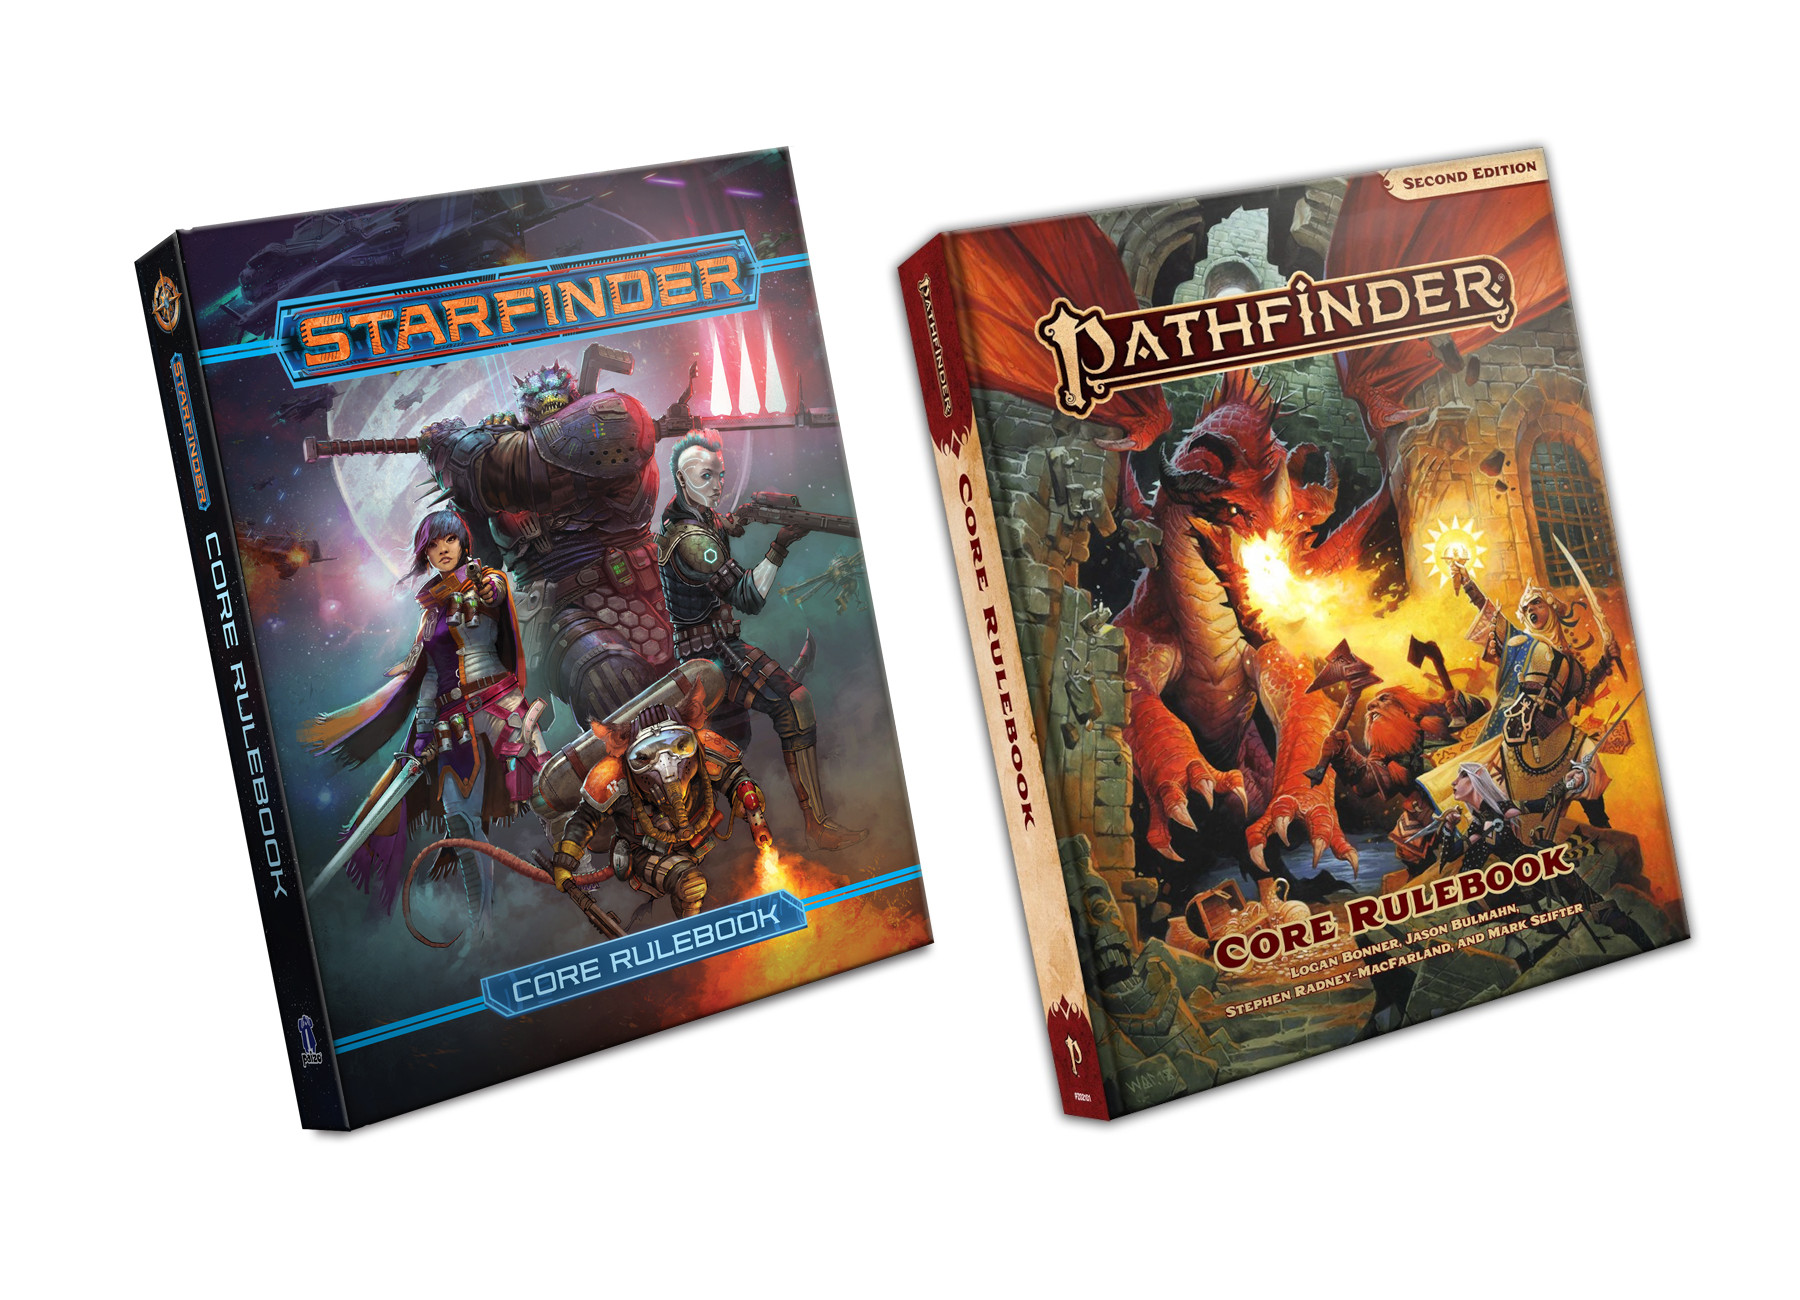 Pathfinder Second Edition Core Rulebook and Starfinder Core Rulebook Digital CD Key $12.58